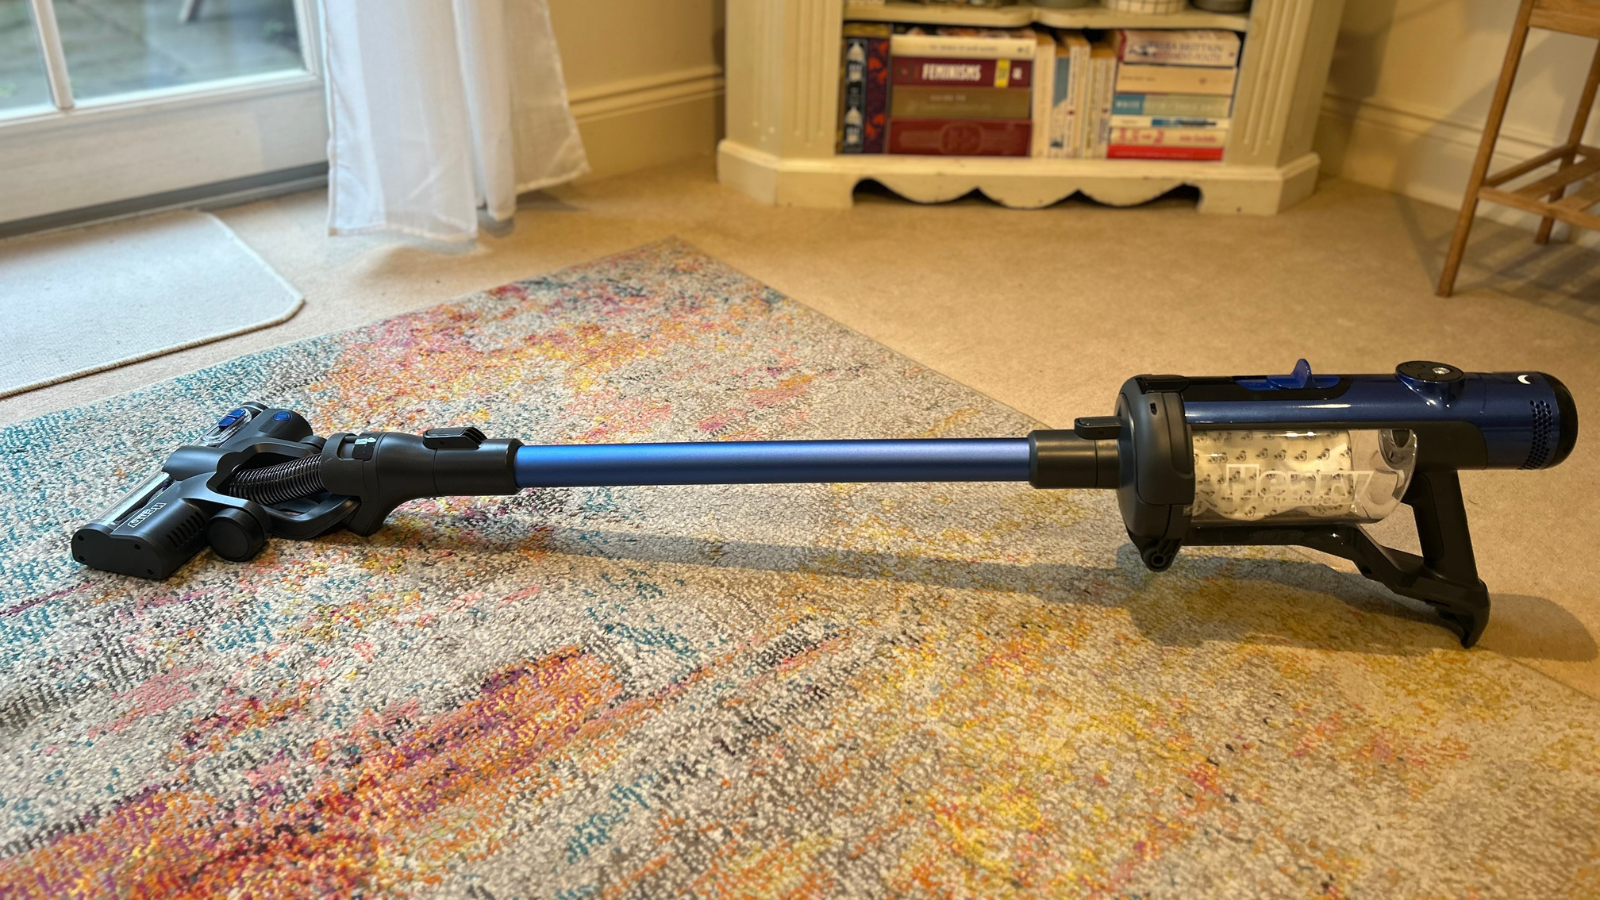 Ultenic U12 Vesla review: a game-changing cordless vacuum cleaner with the  features to match